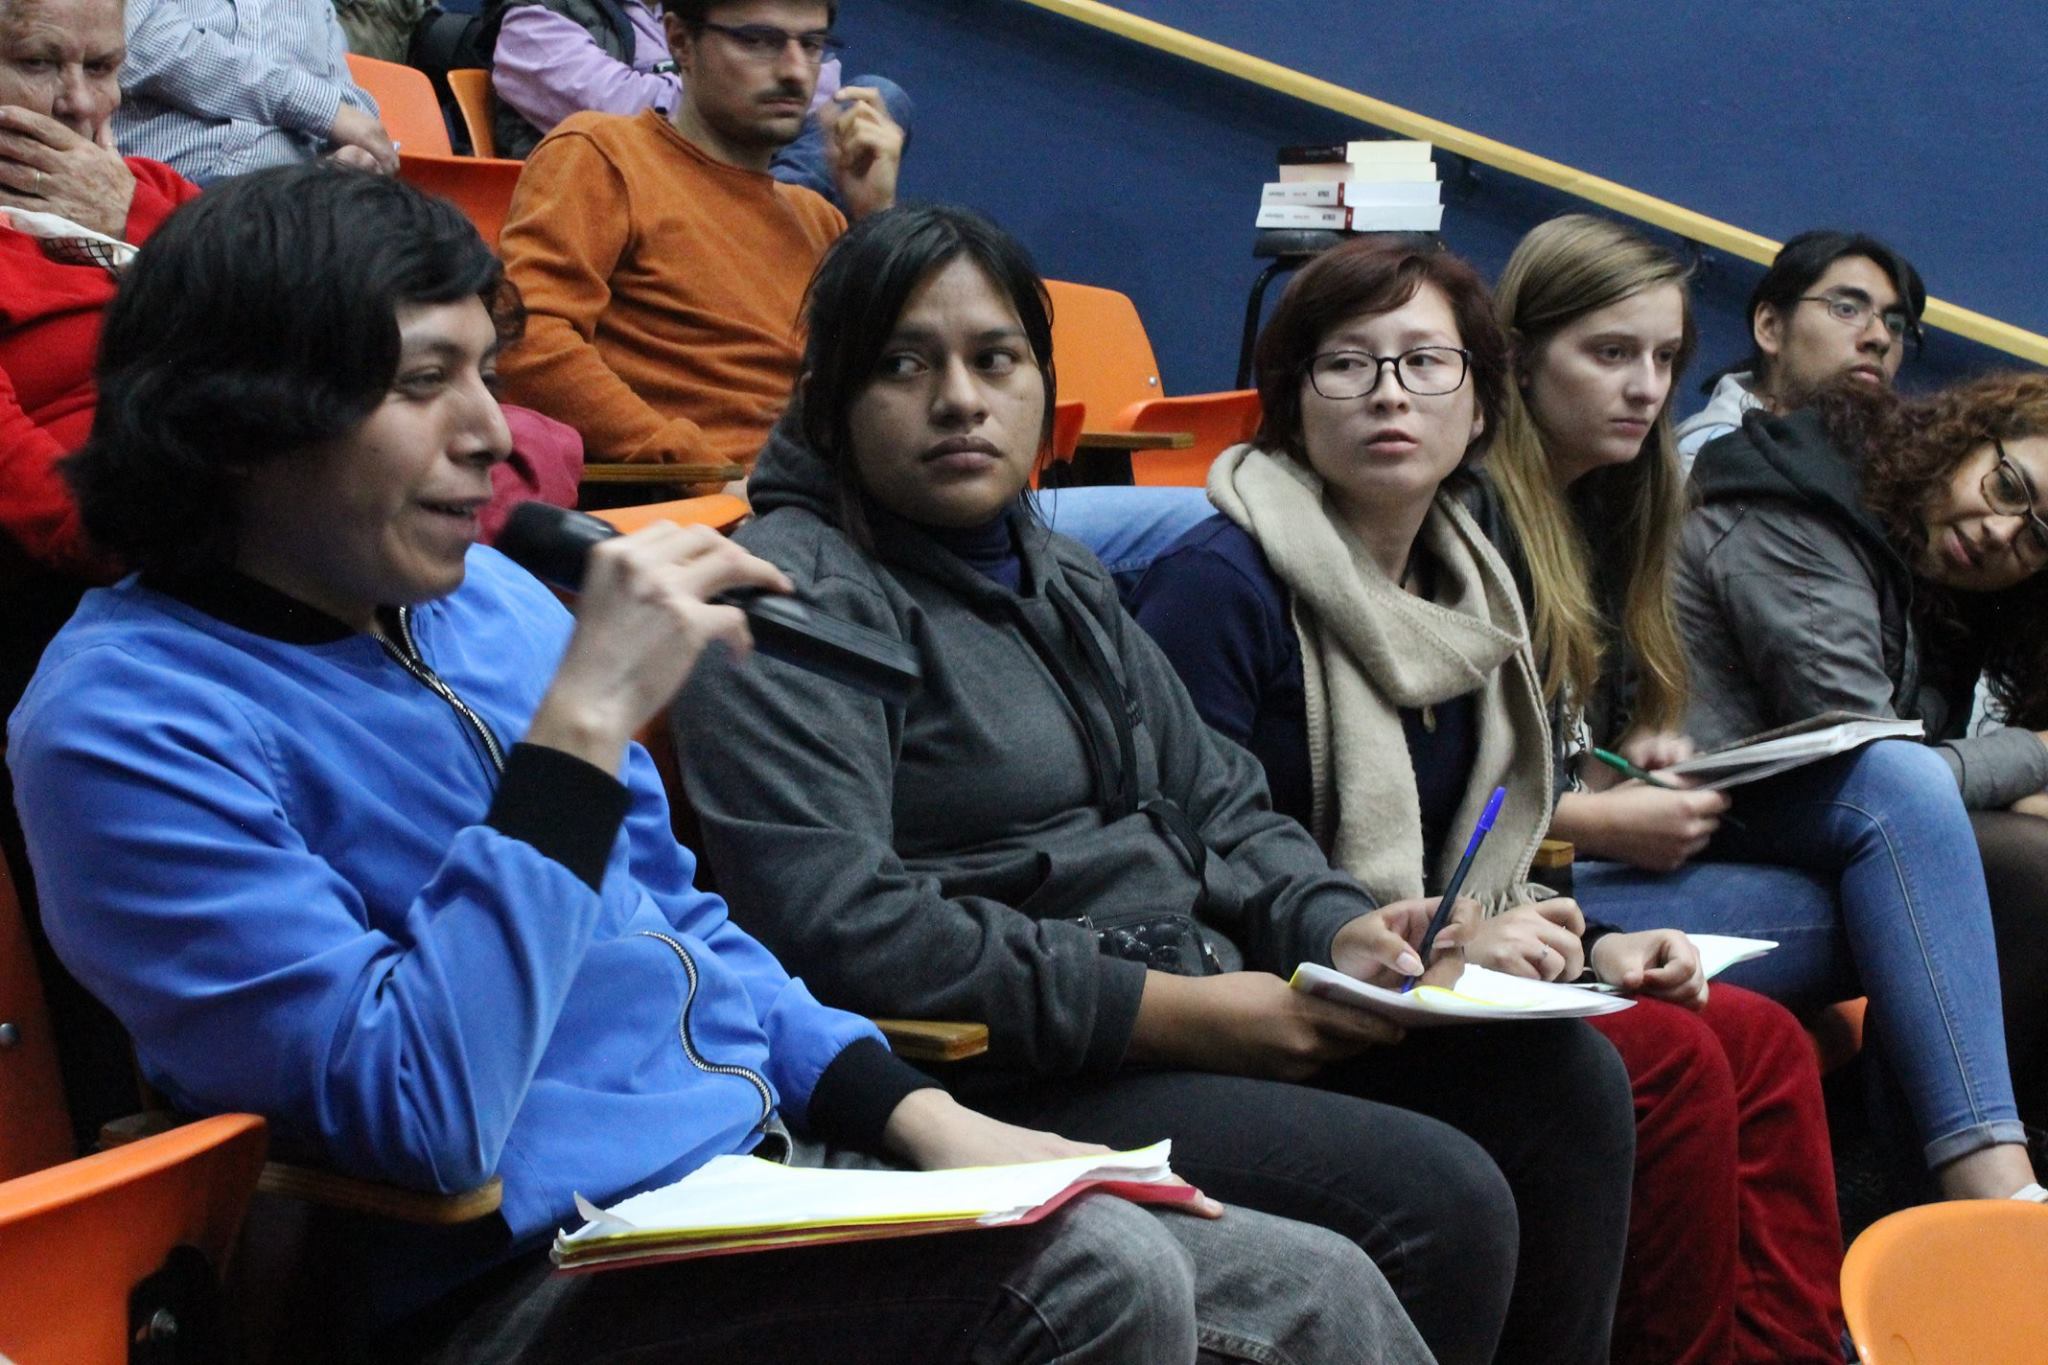 There were many interesting questions raised by the audience Image La Izquierda Socialista